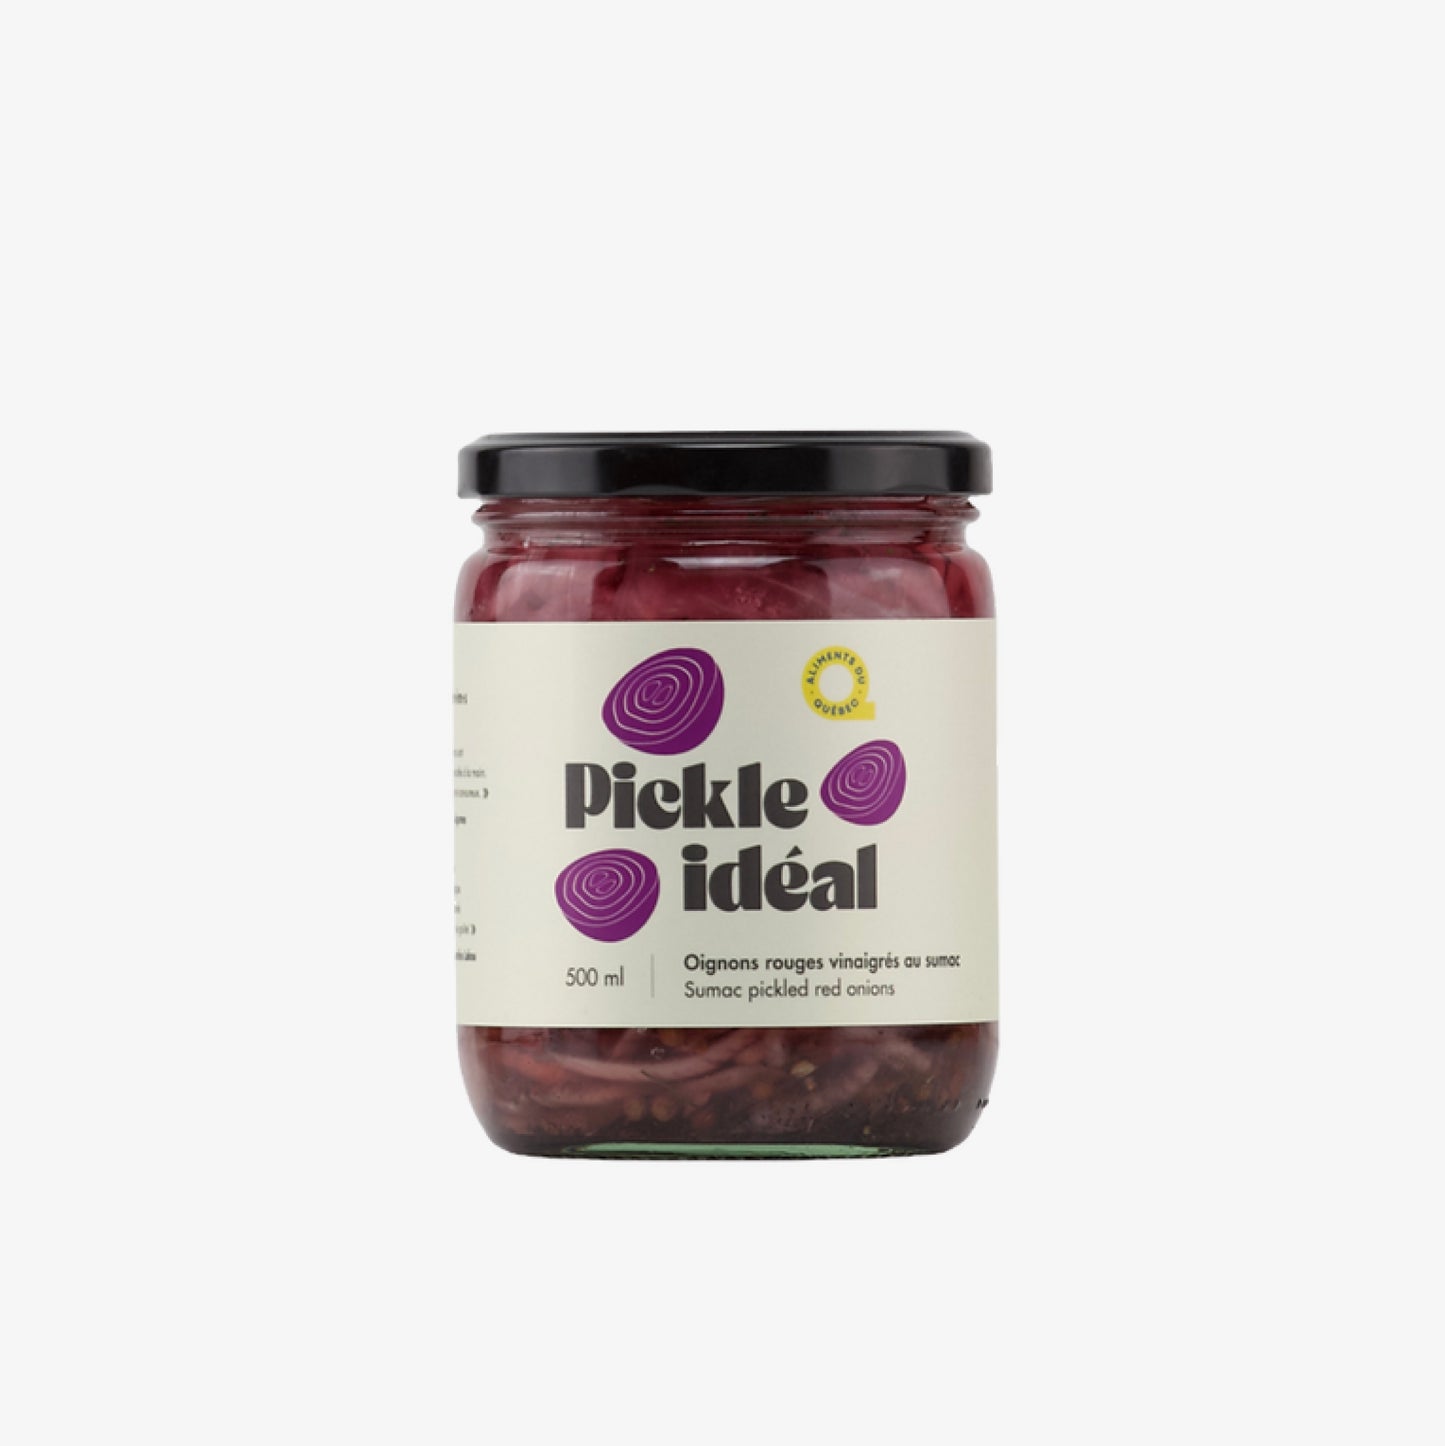 Sumac Pickled Red Onions